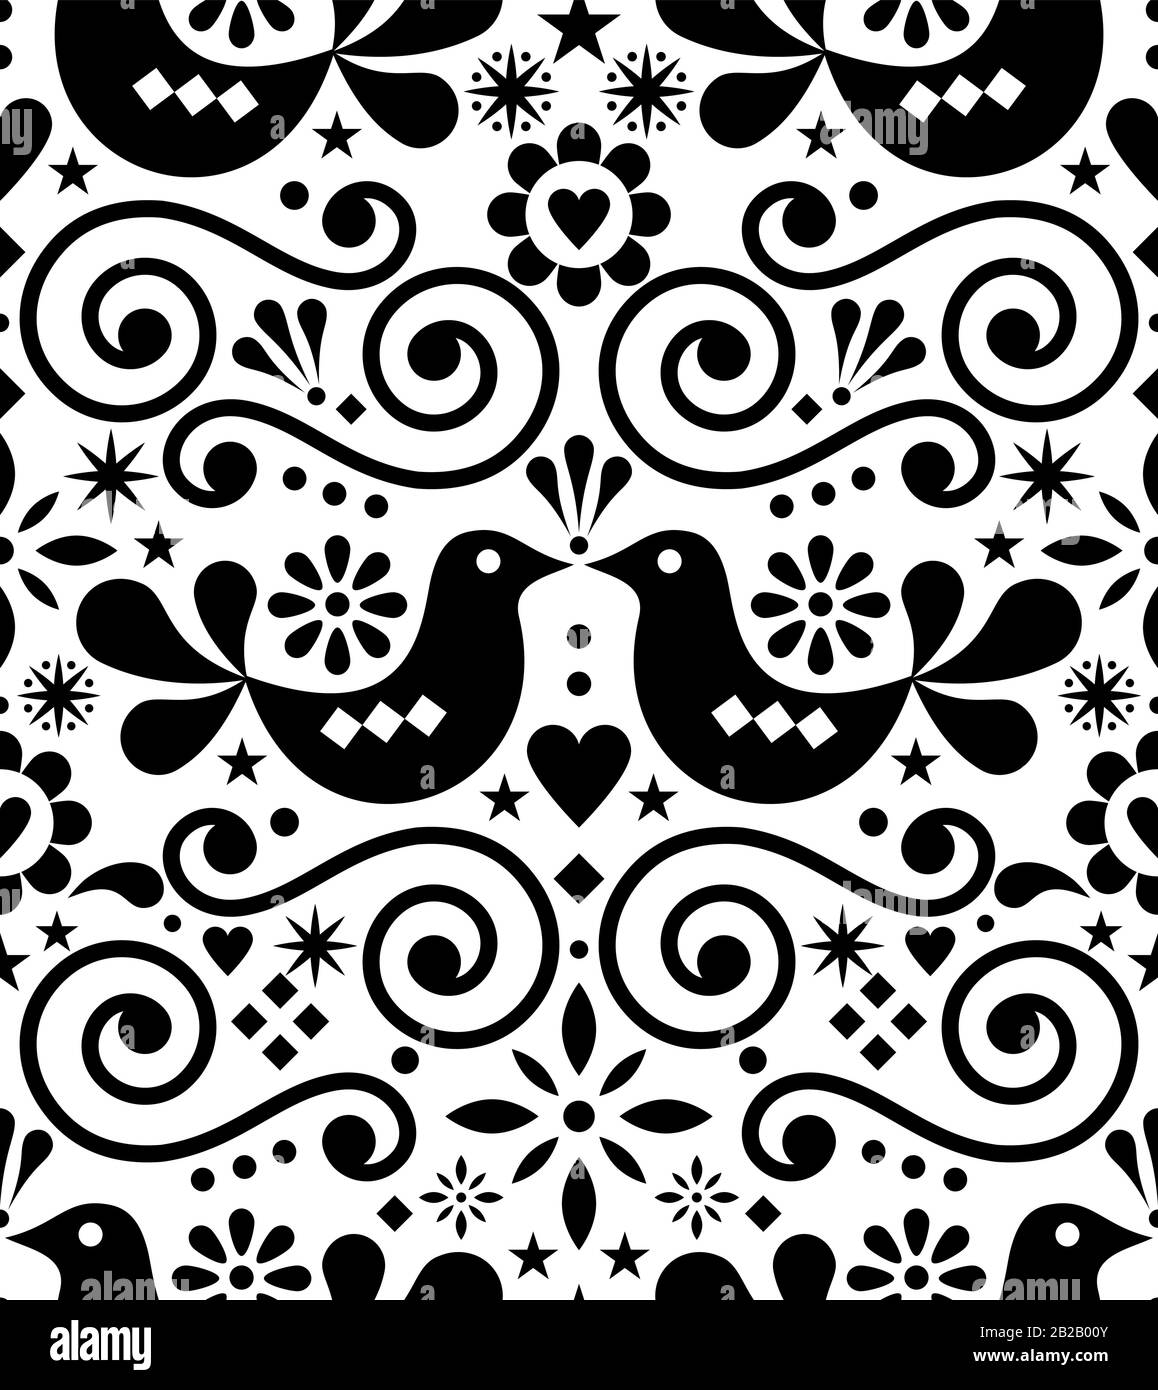 Scandinavian floral folk art vector seamless design, cute Nordic pattern with birds in black on white background Stock Vector